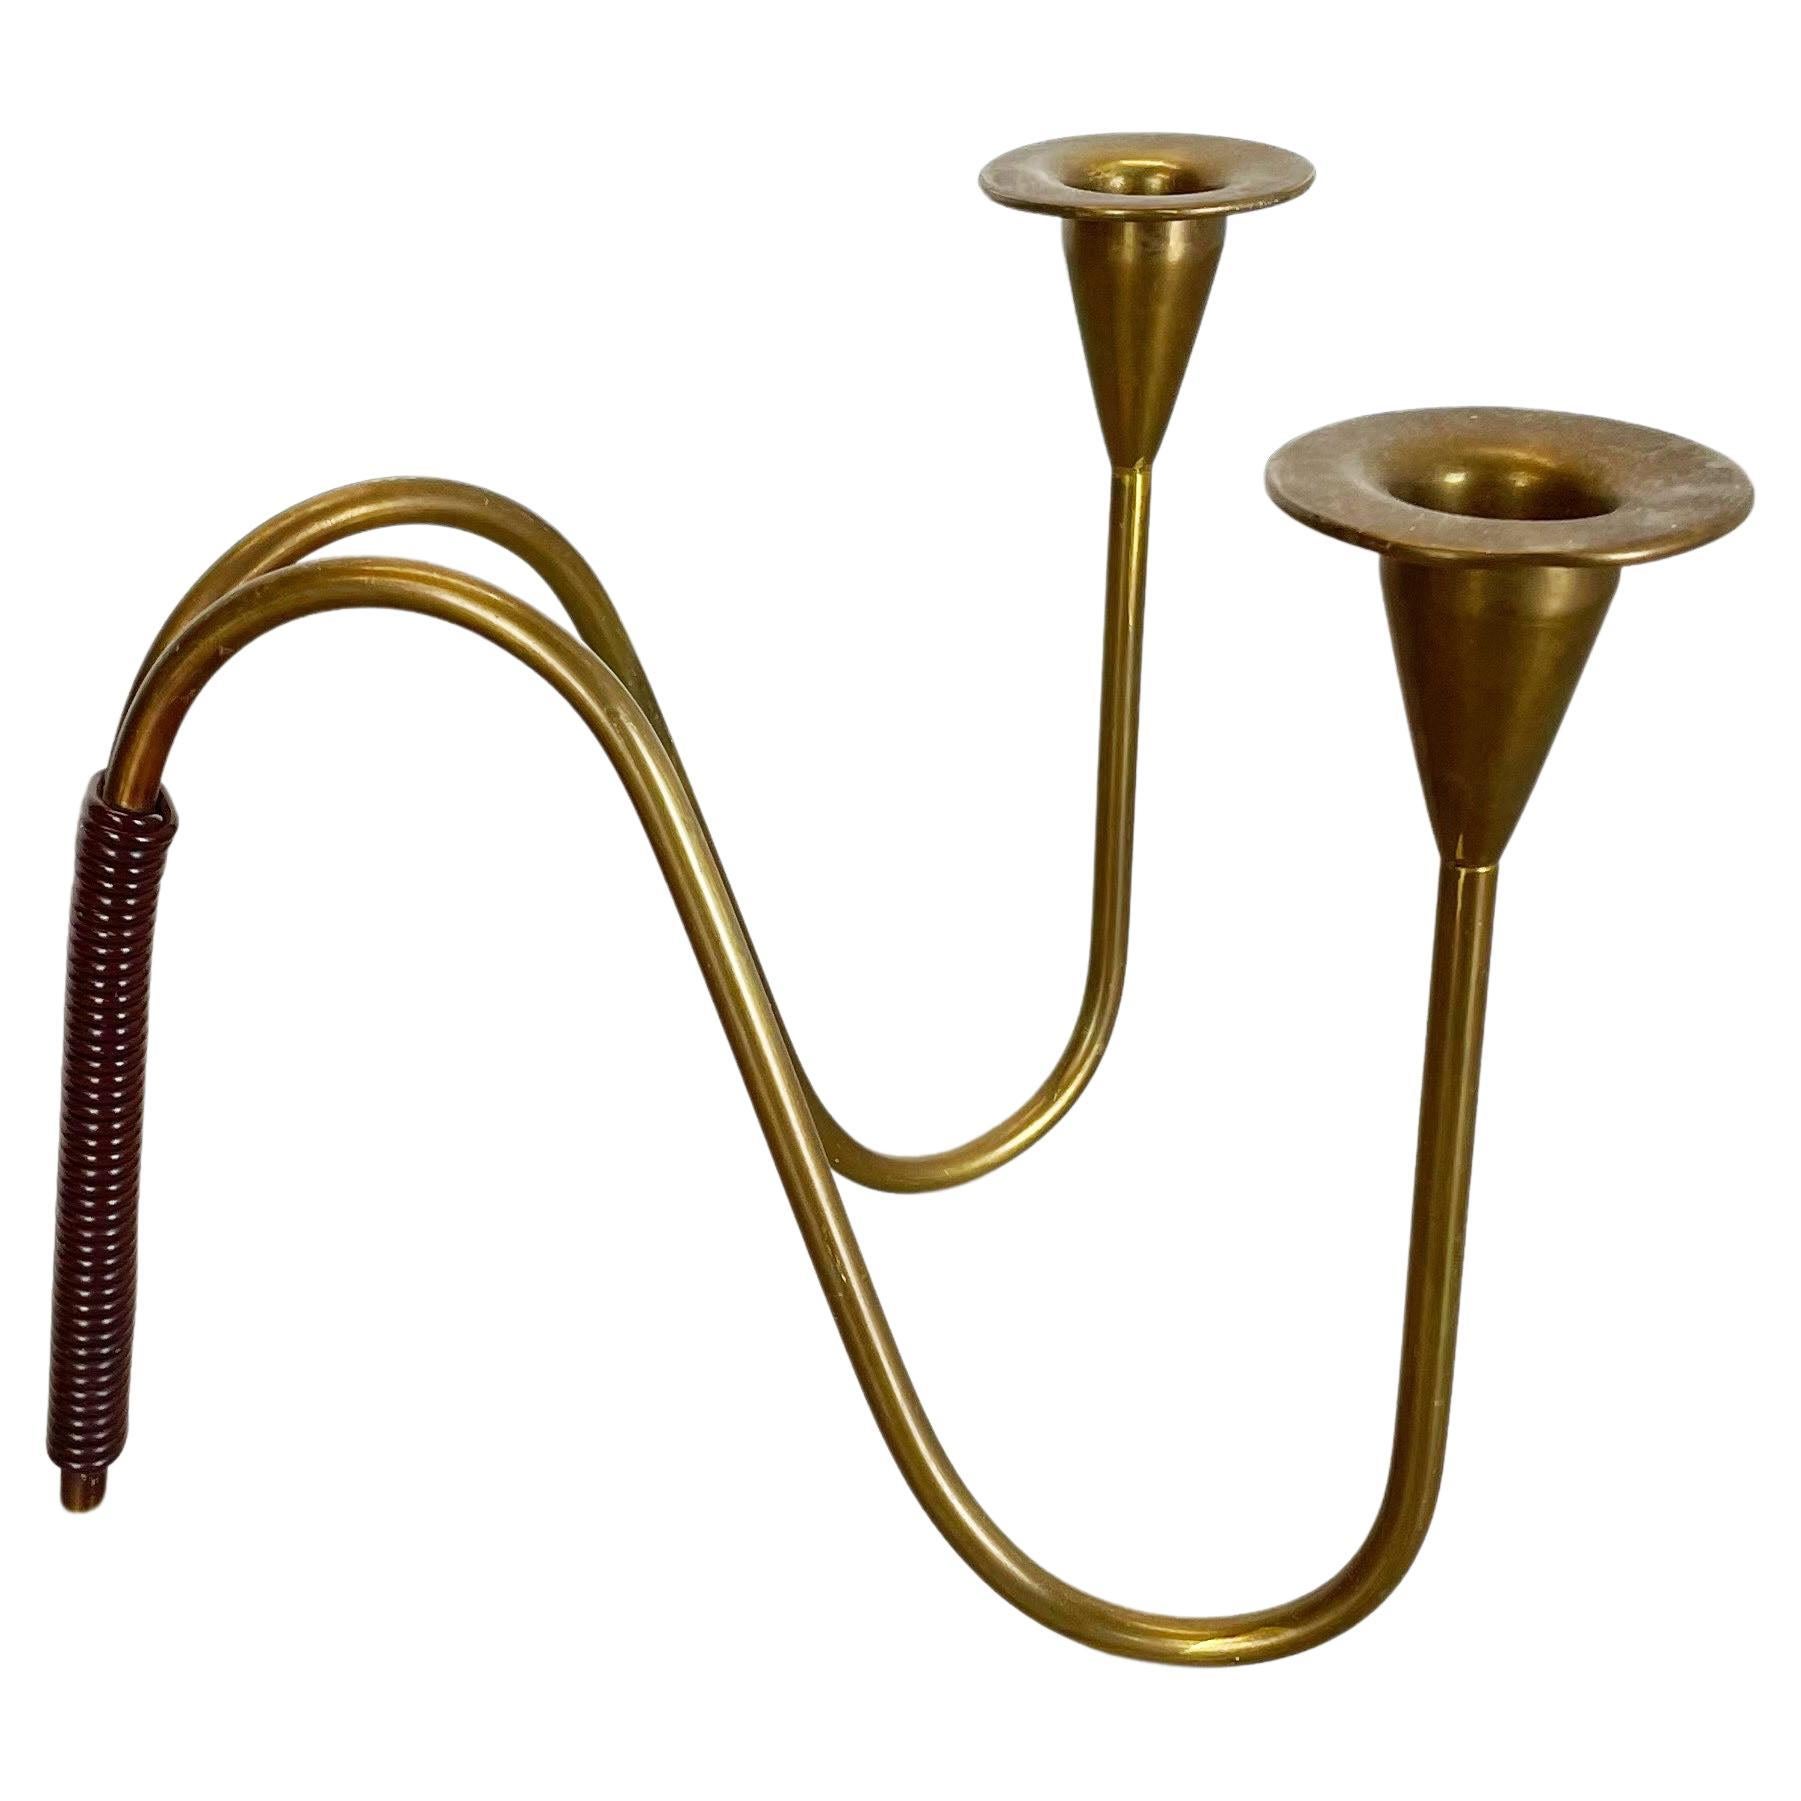 Sculptural Brass Candleholder Object by Günter Kupetz for WMF, Germany 1950s For Sale